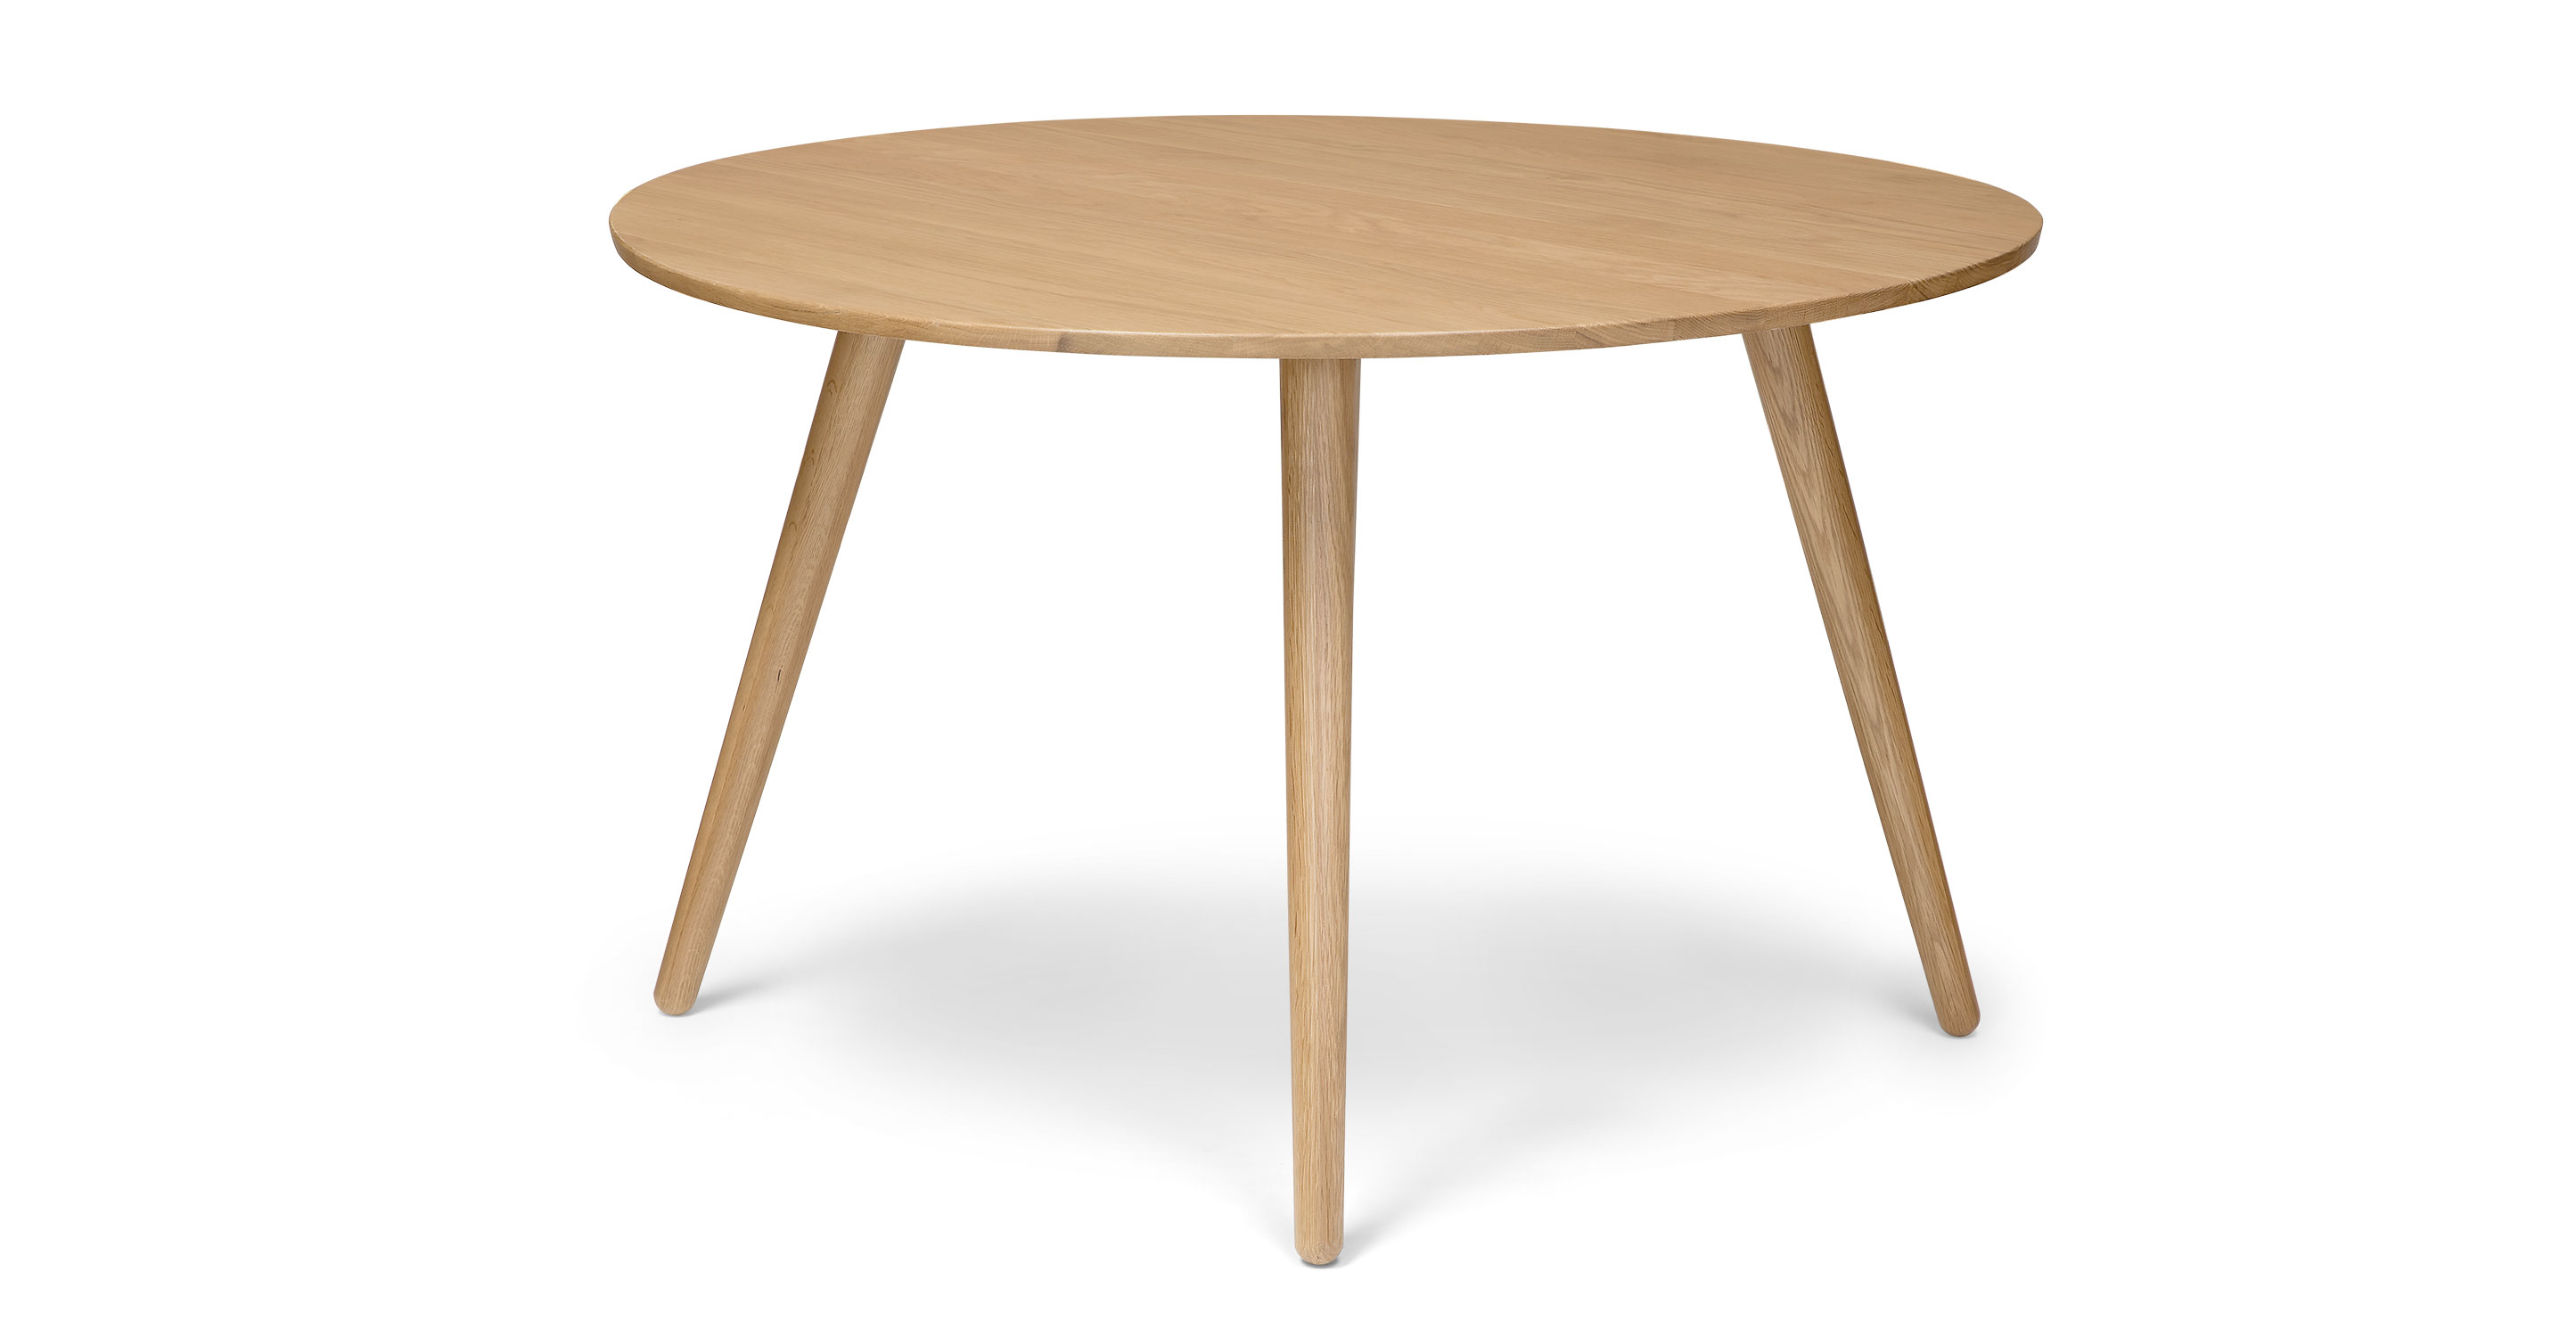 Round Oak Wood Dining Table For 4, 52 Round Dining Table Setup